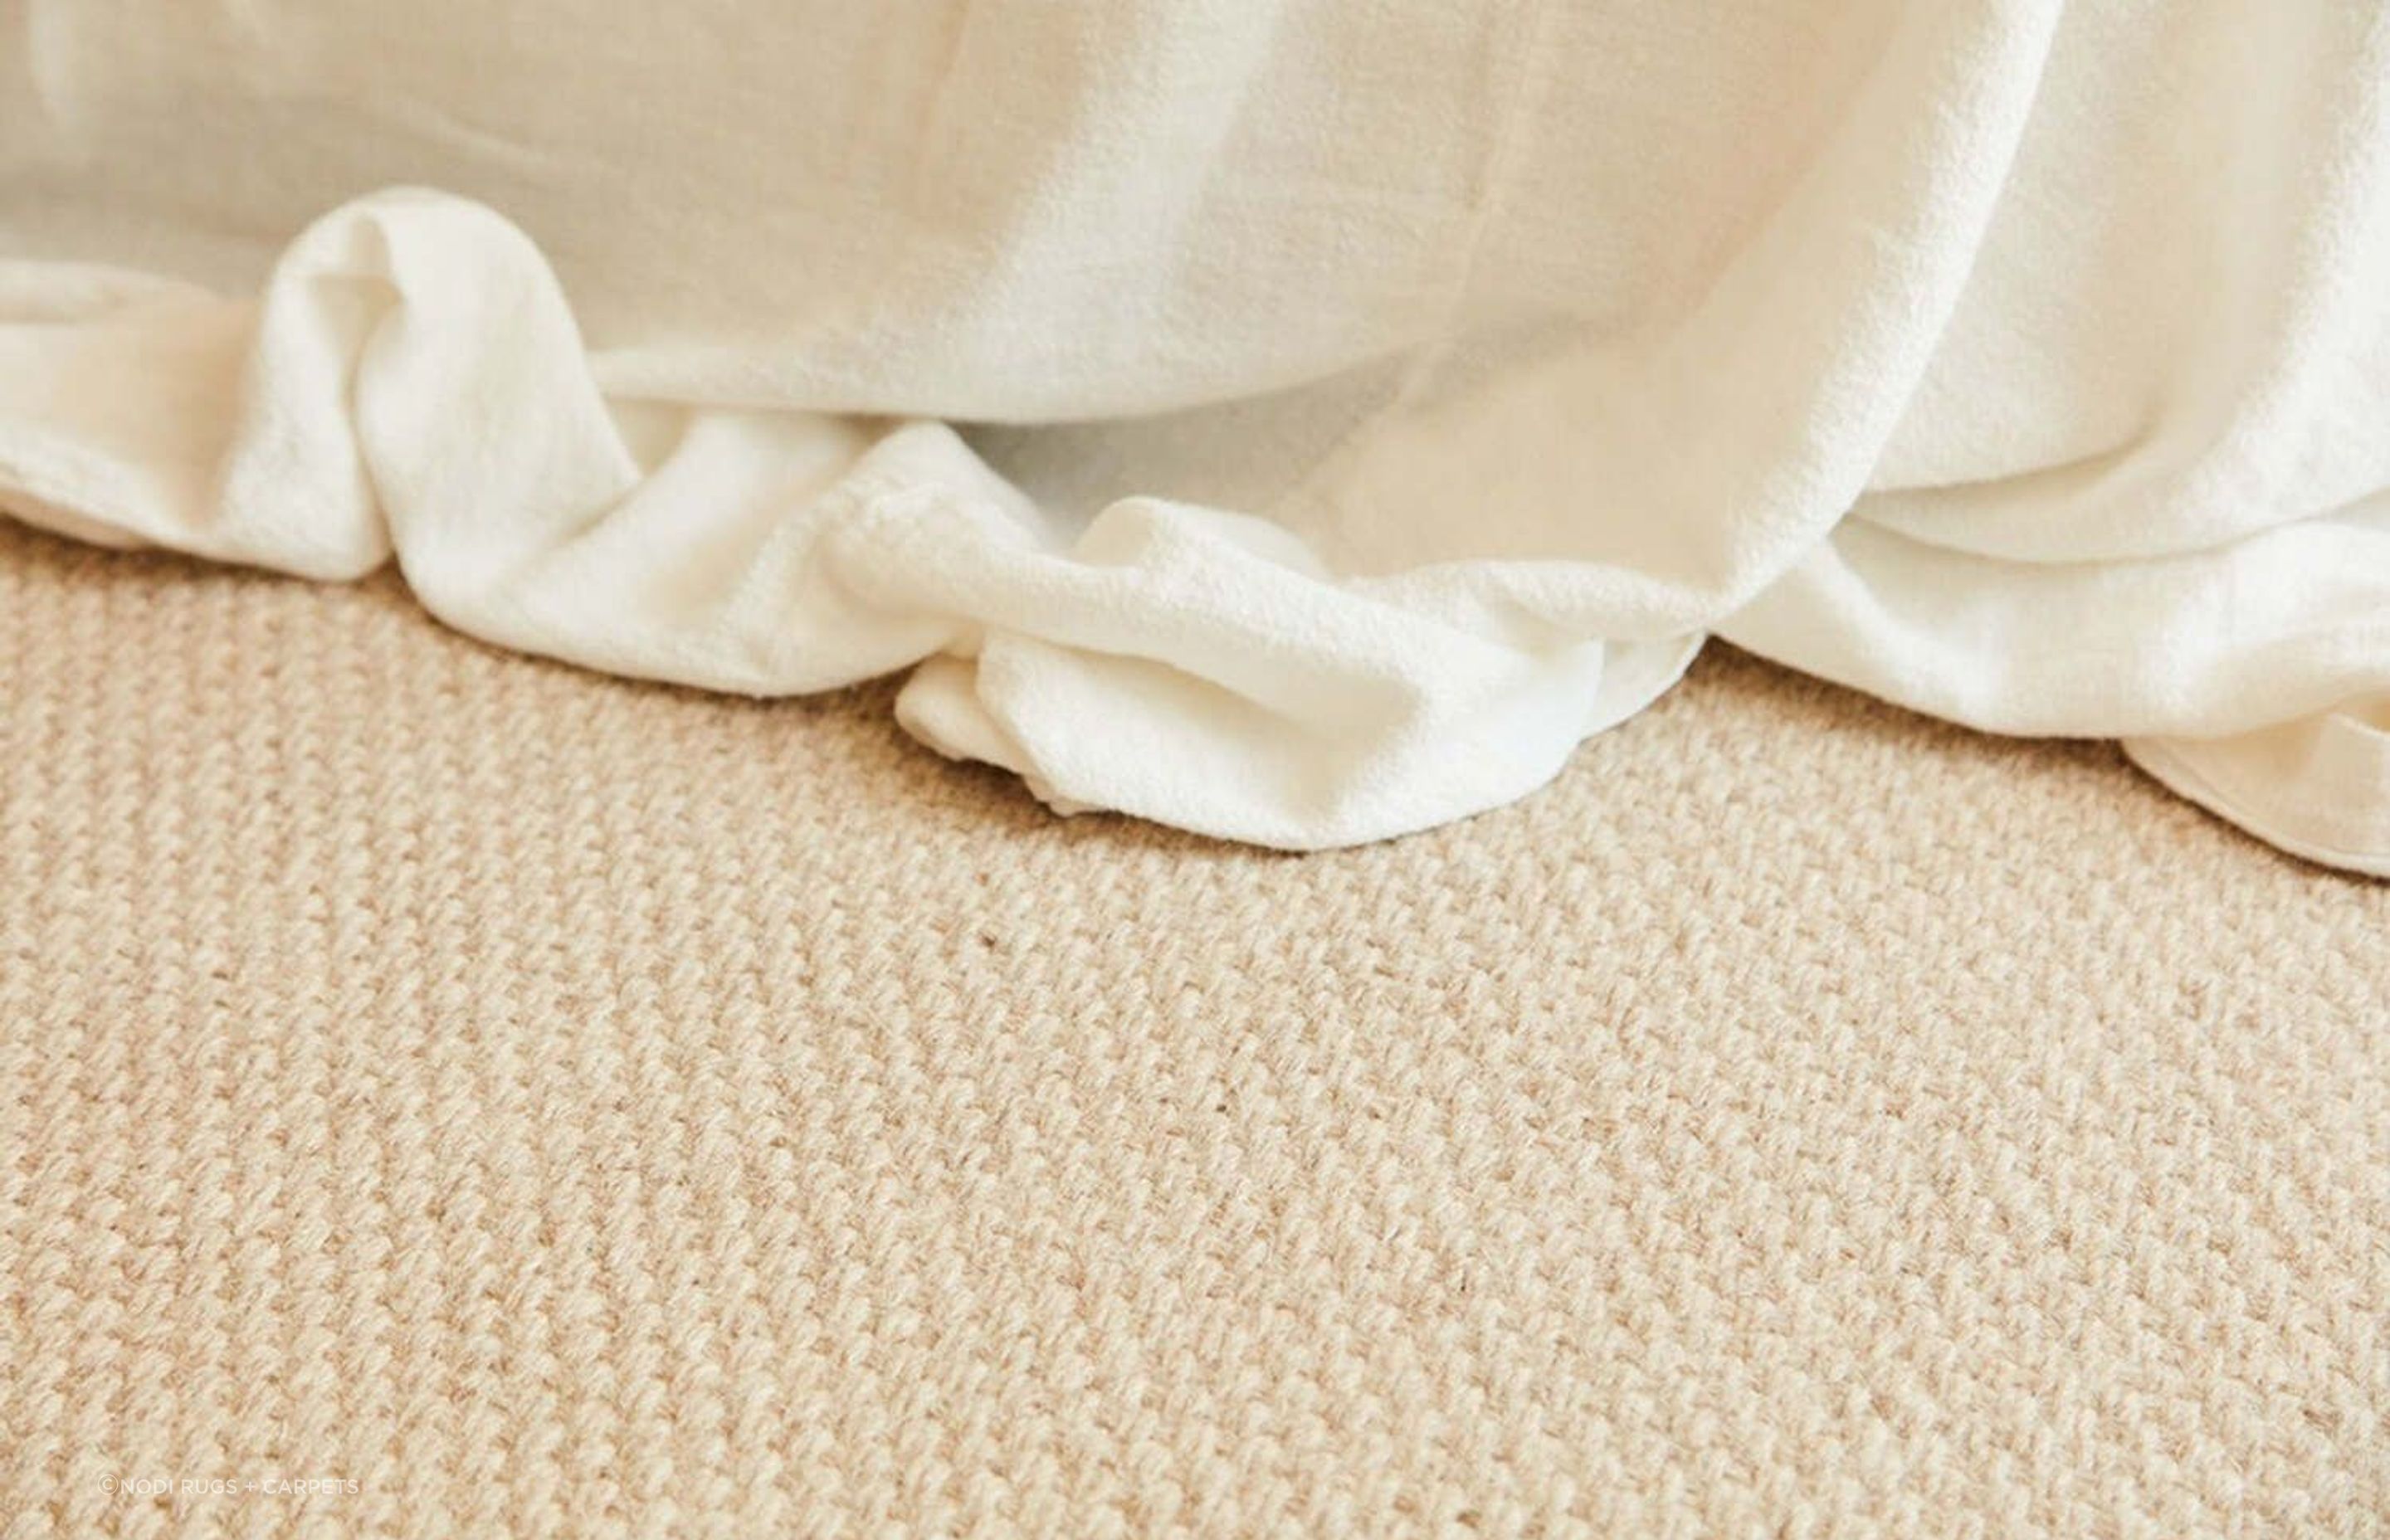 The Basket Weave Marle Grey Carpet is an exquisite handcrafted option to consider for your home.